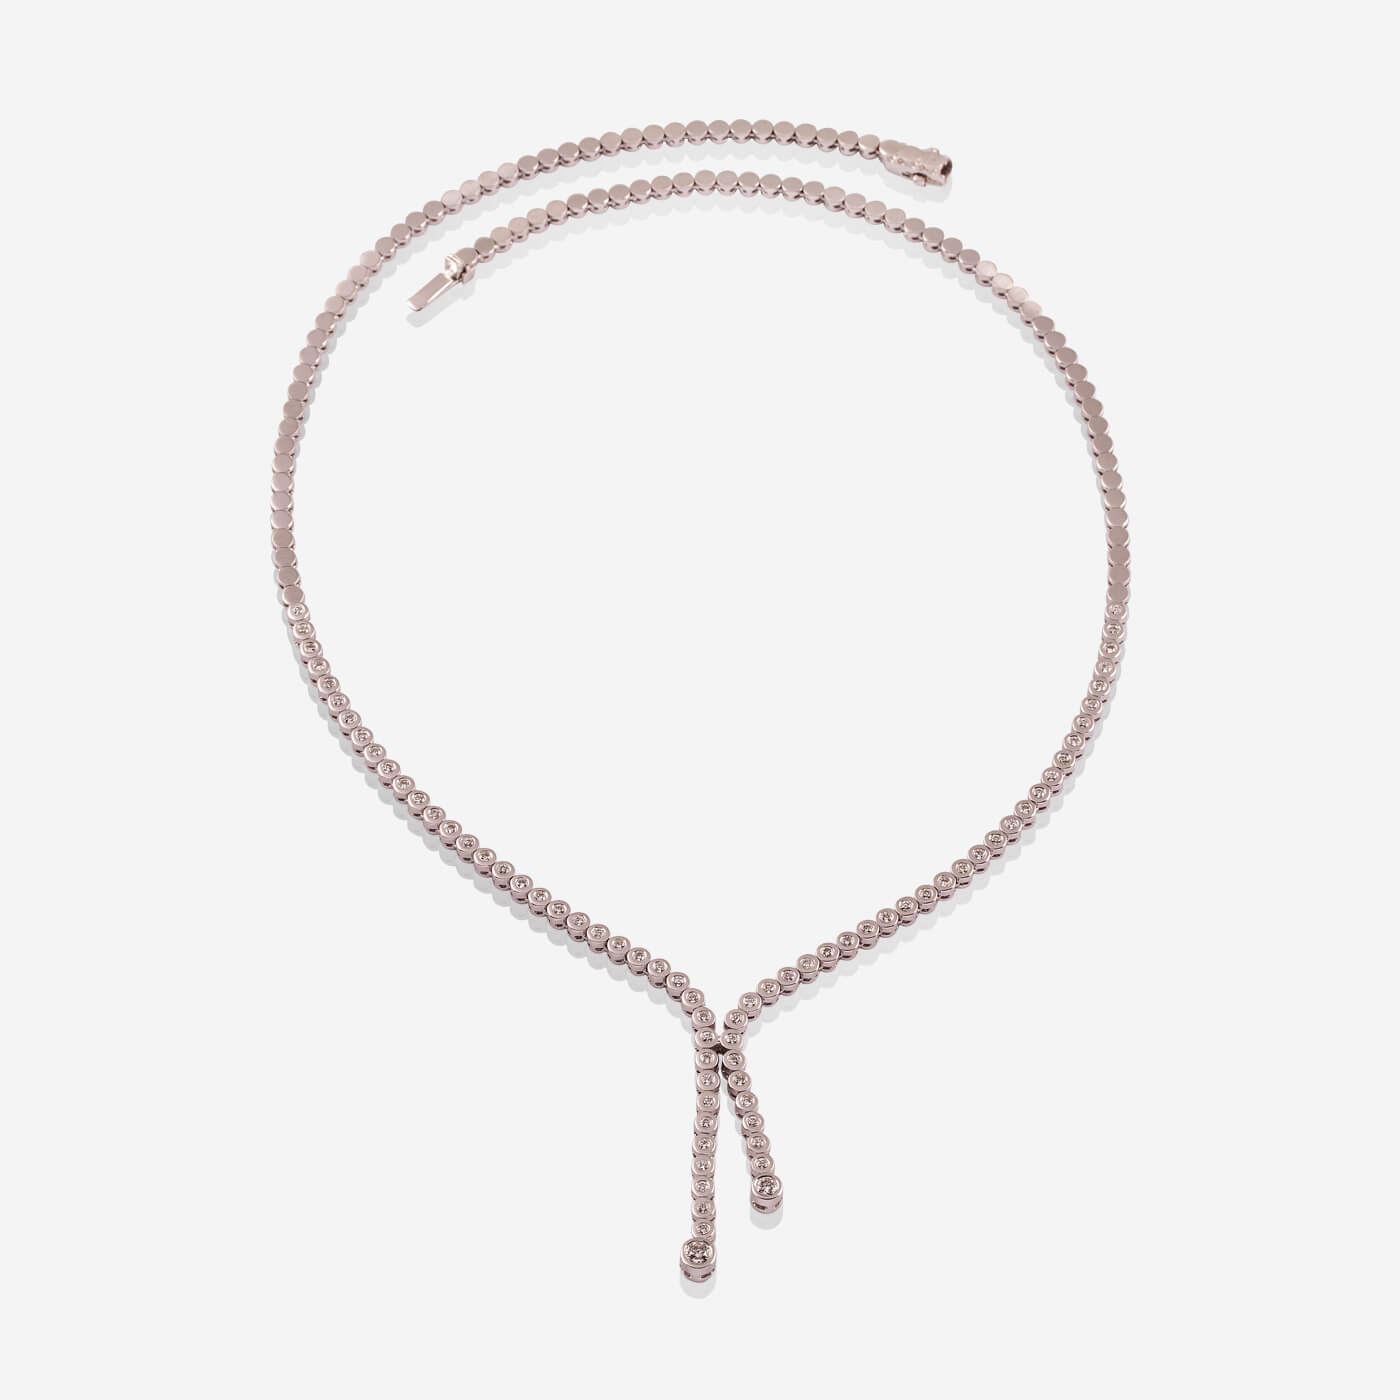 White Gold 2 Dangling Crossing Lines Choker With Diamonds Necklace - Ref: RG03531